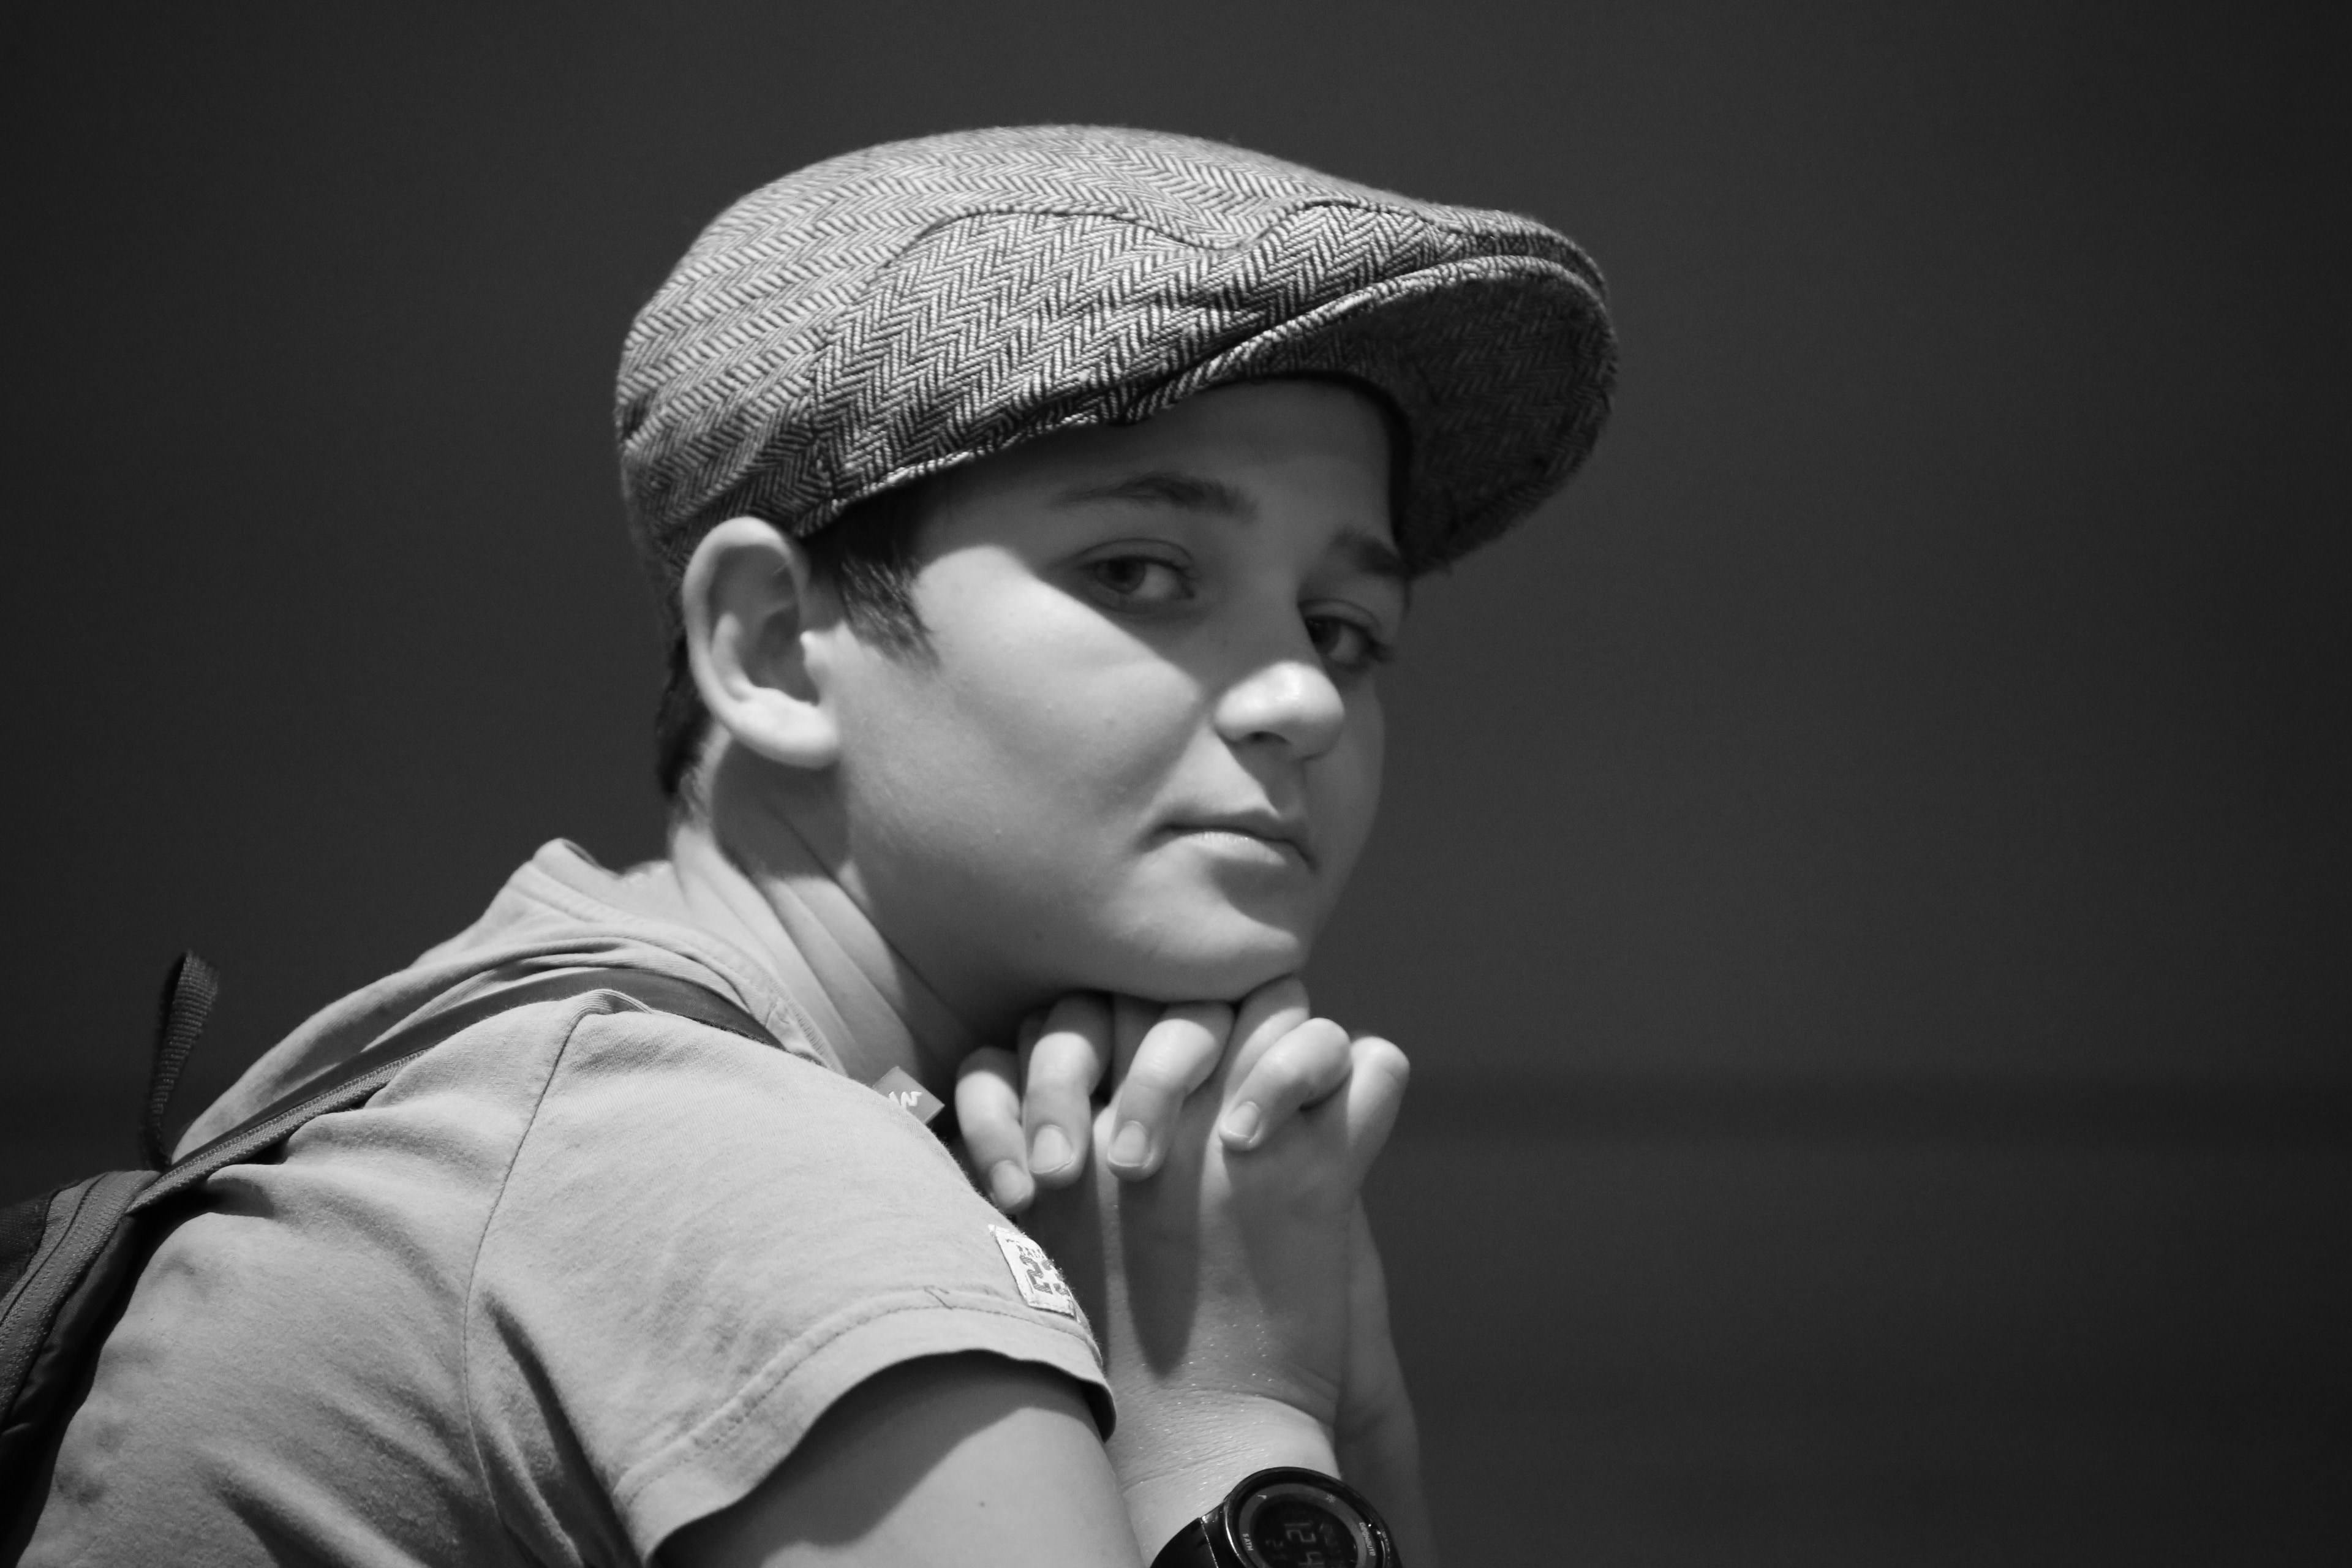 greyscale photography of boy wearing cap sleeve shirt and cap